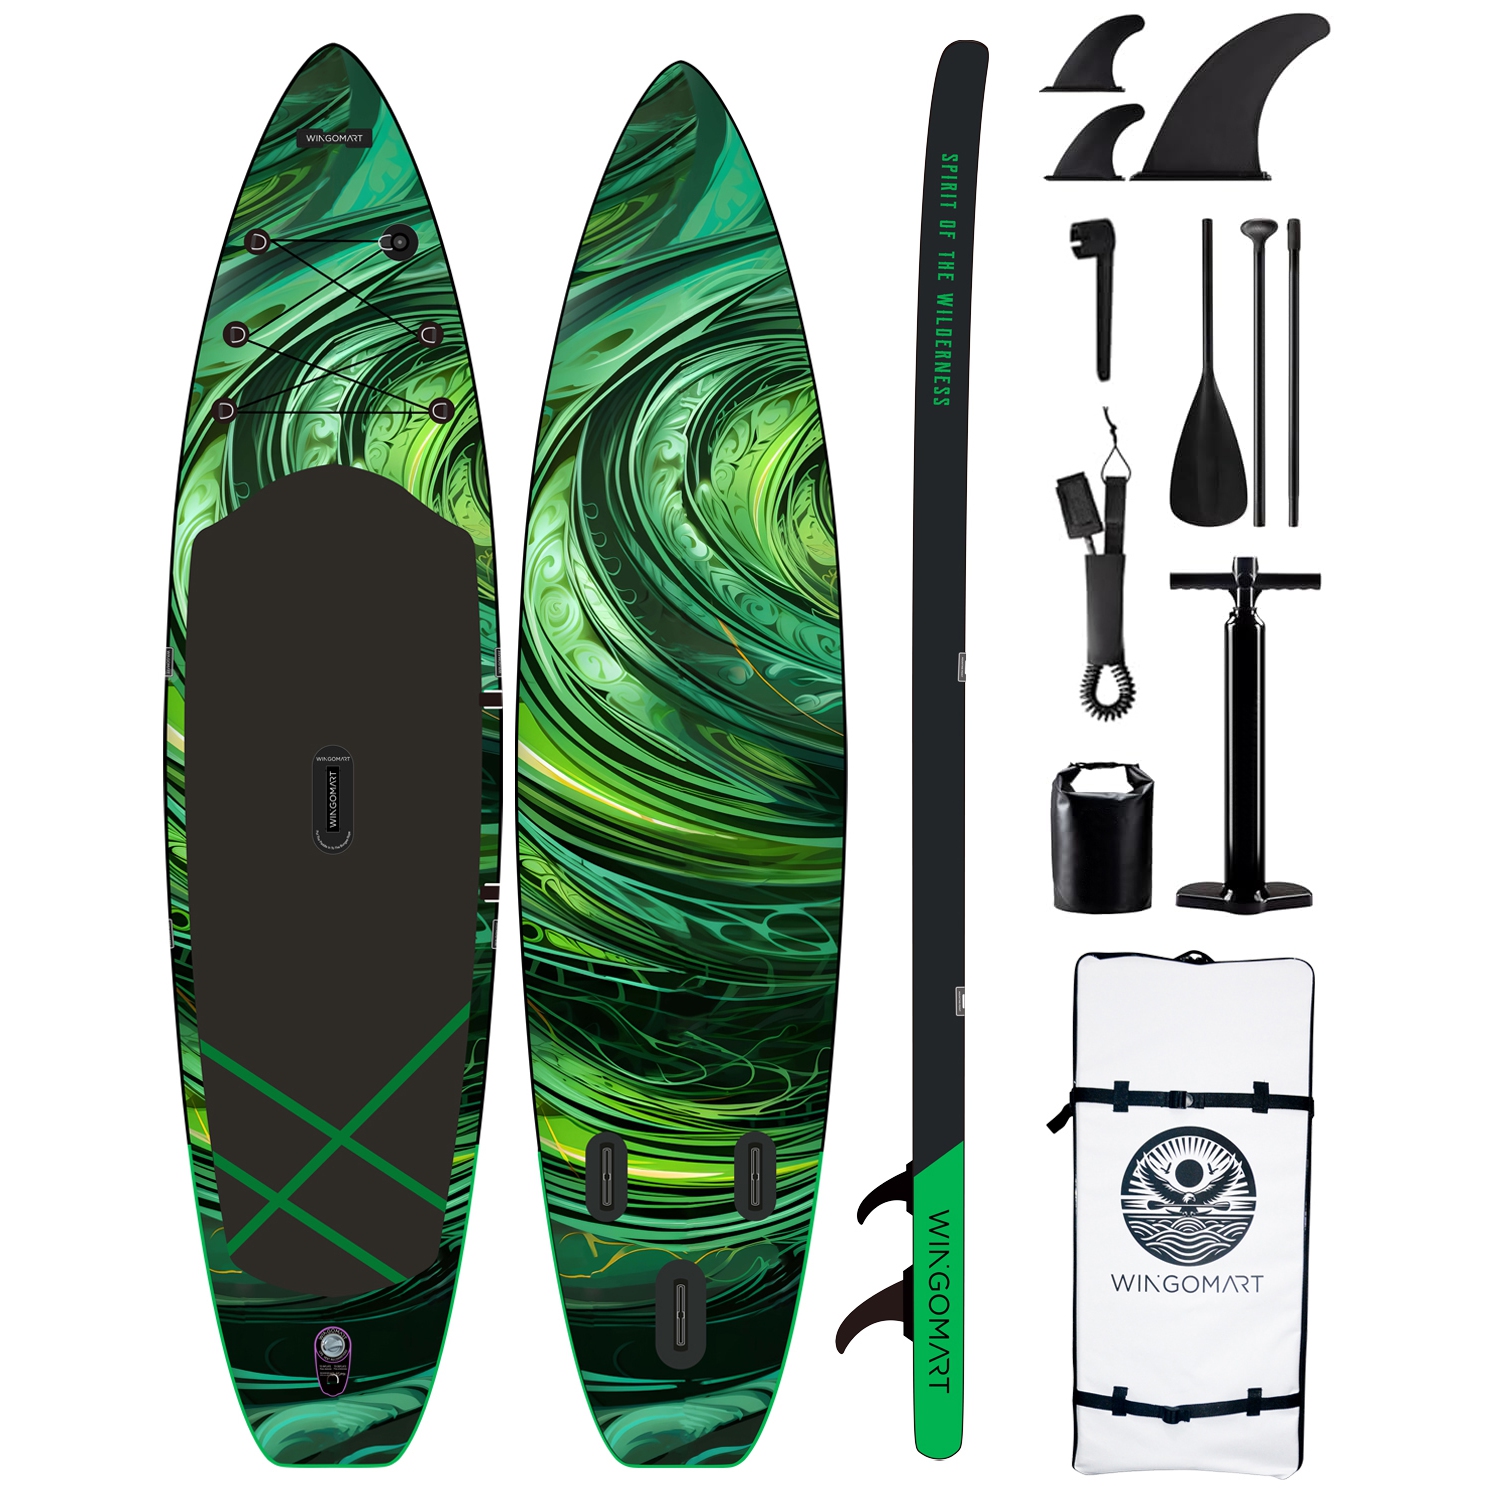 GREEN EMERALD 11FT x 33" Super Wide Inflatable Stand Up Paddle Board, Ultra Stable Wide SUP Up to 2 people/375LB Fully equipped w/ Premium SUP Accessories